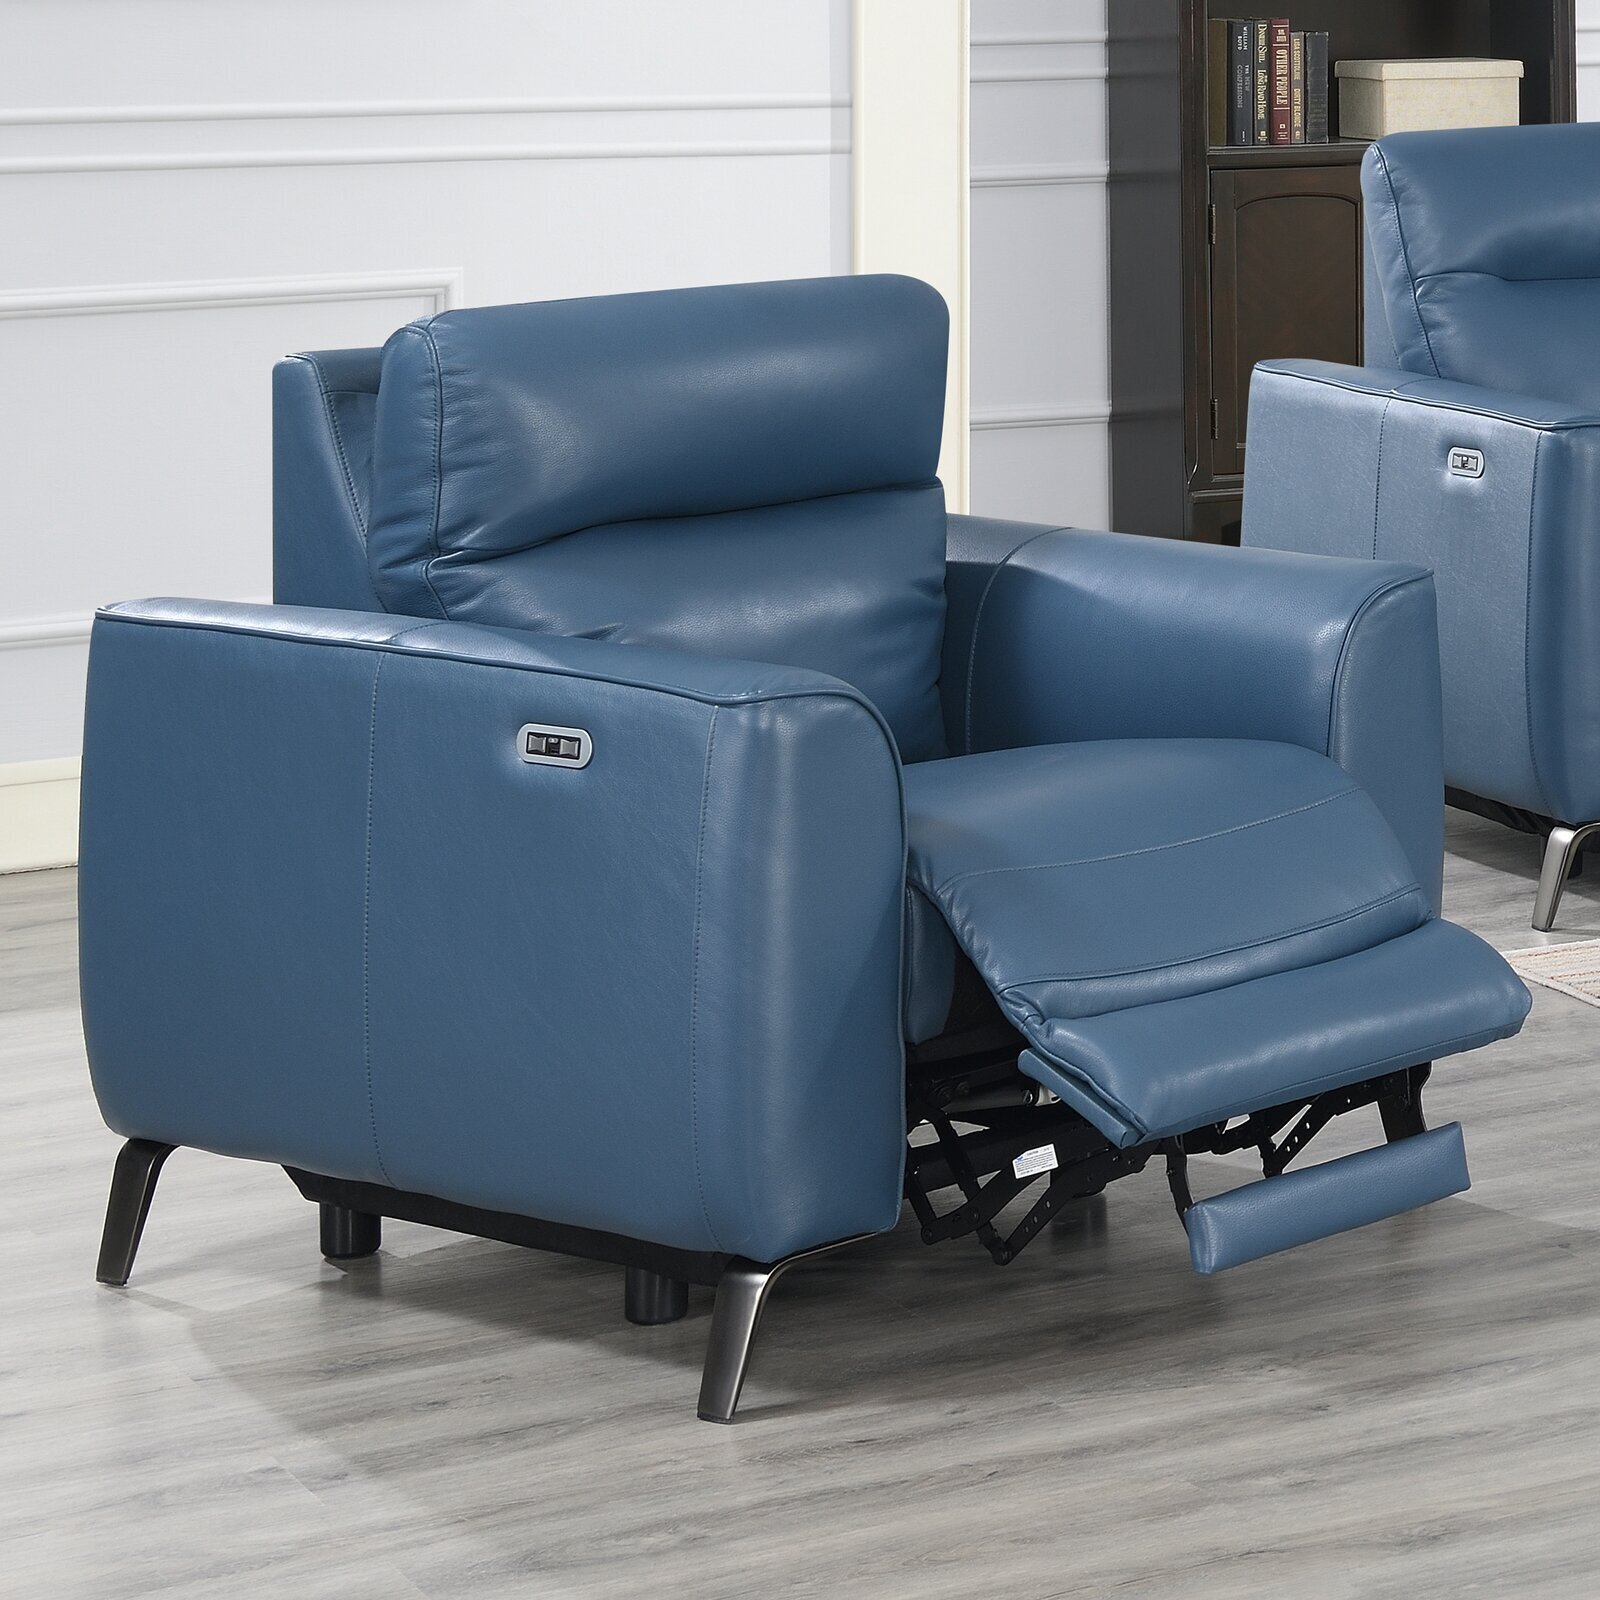 Adjustable blue leather chair with additional features